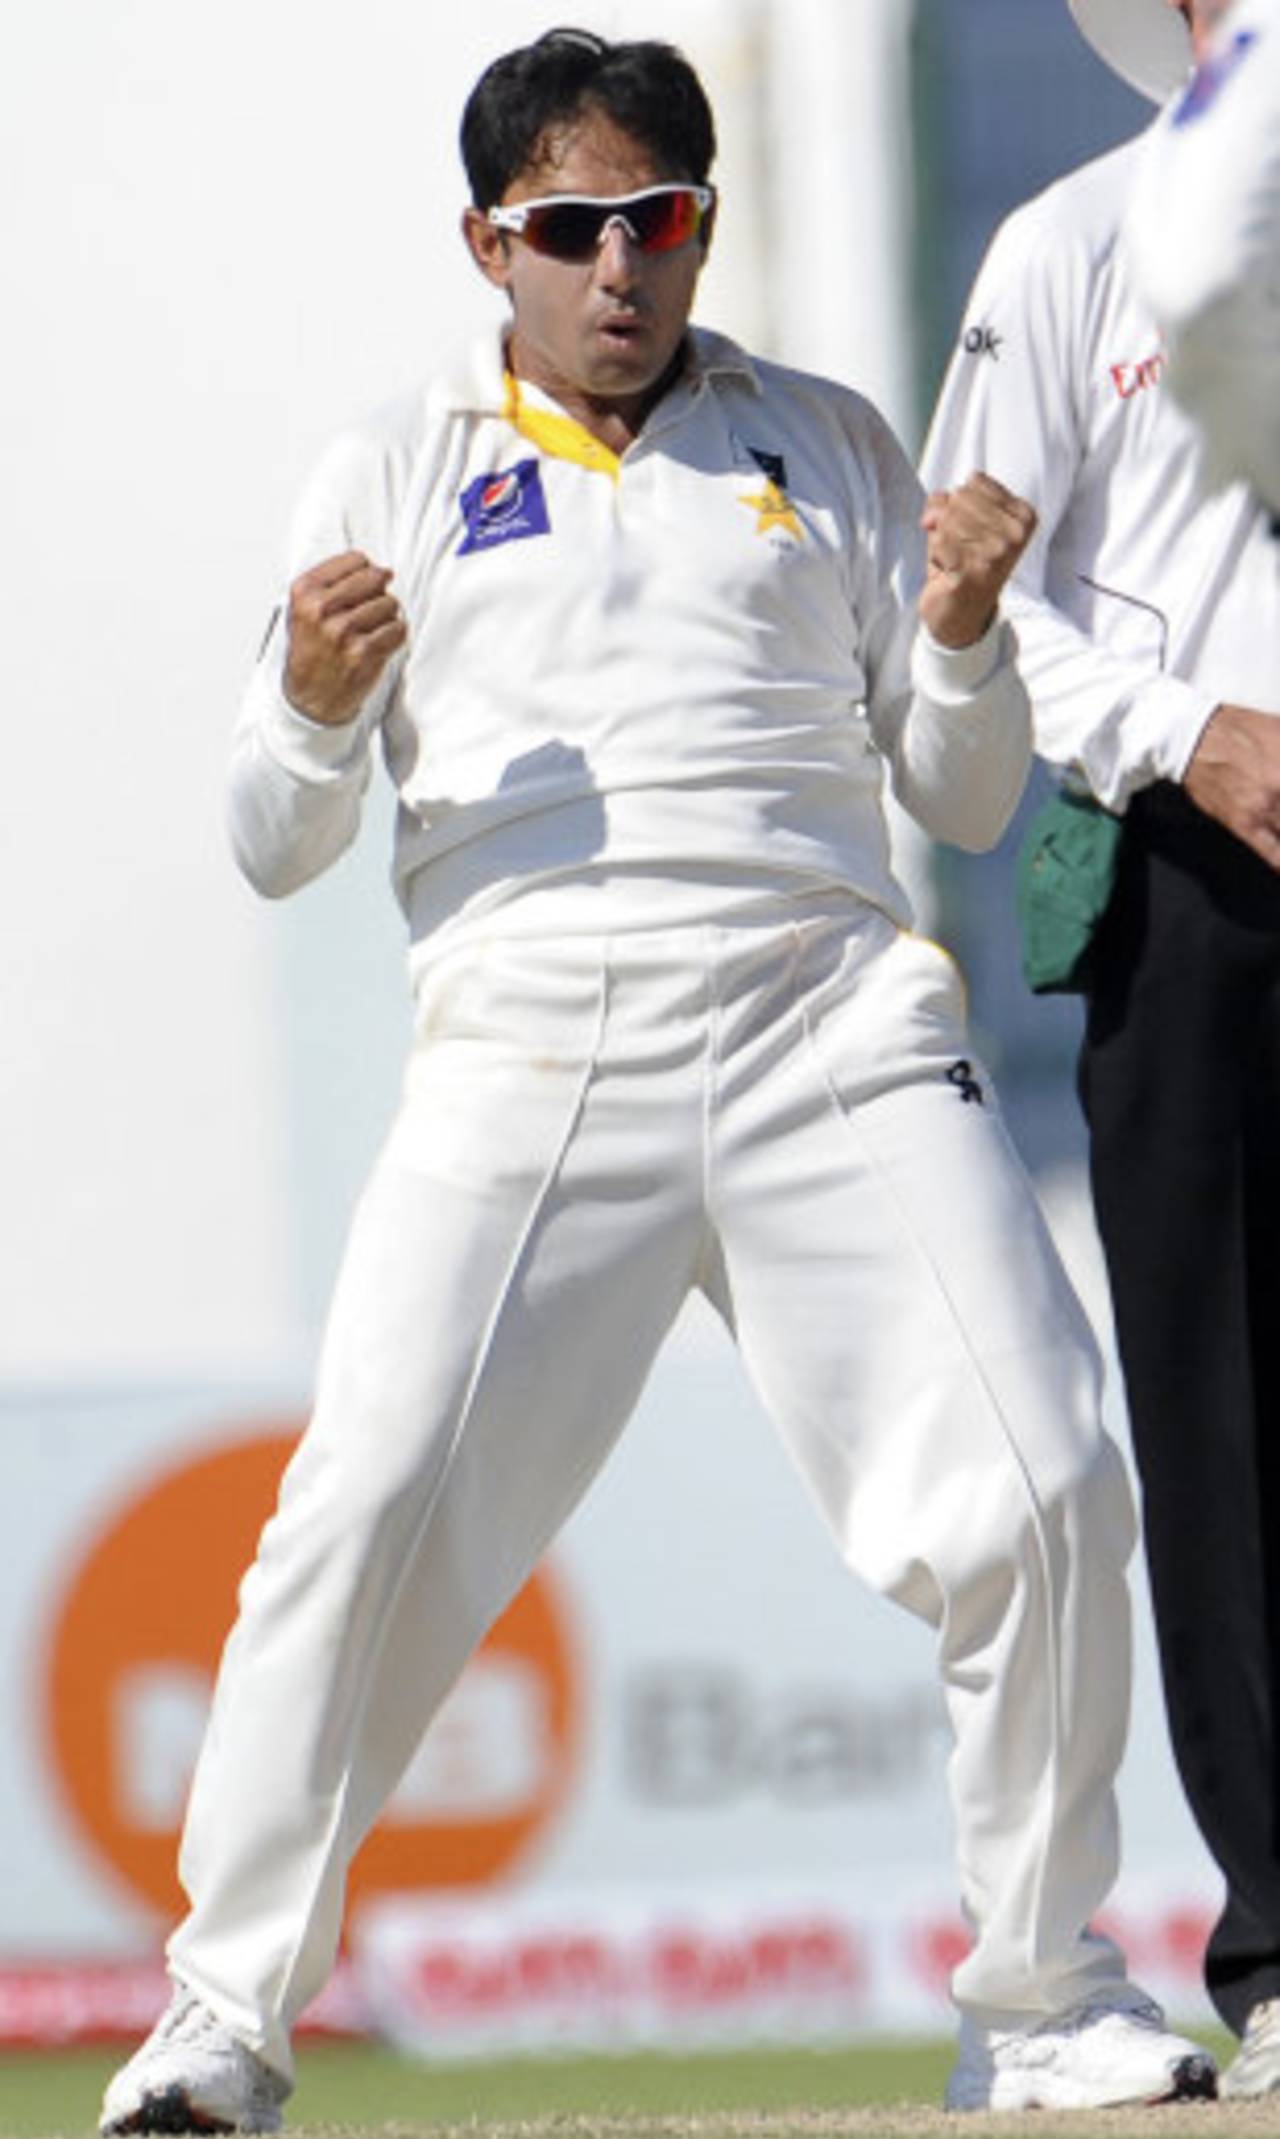 Saeed Ajmal took 4 for 74 in the second innings, Pakistan v South Africa, 1st Test, 4th day, Abu Dhabi, October 17, 2013